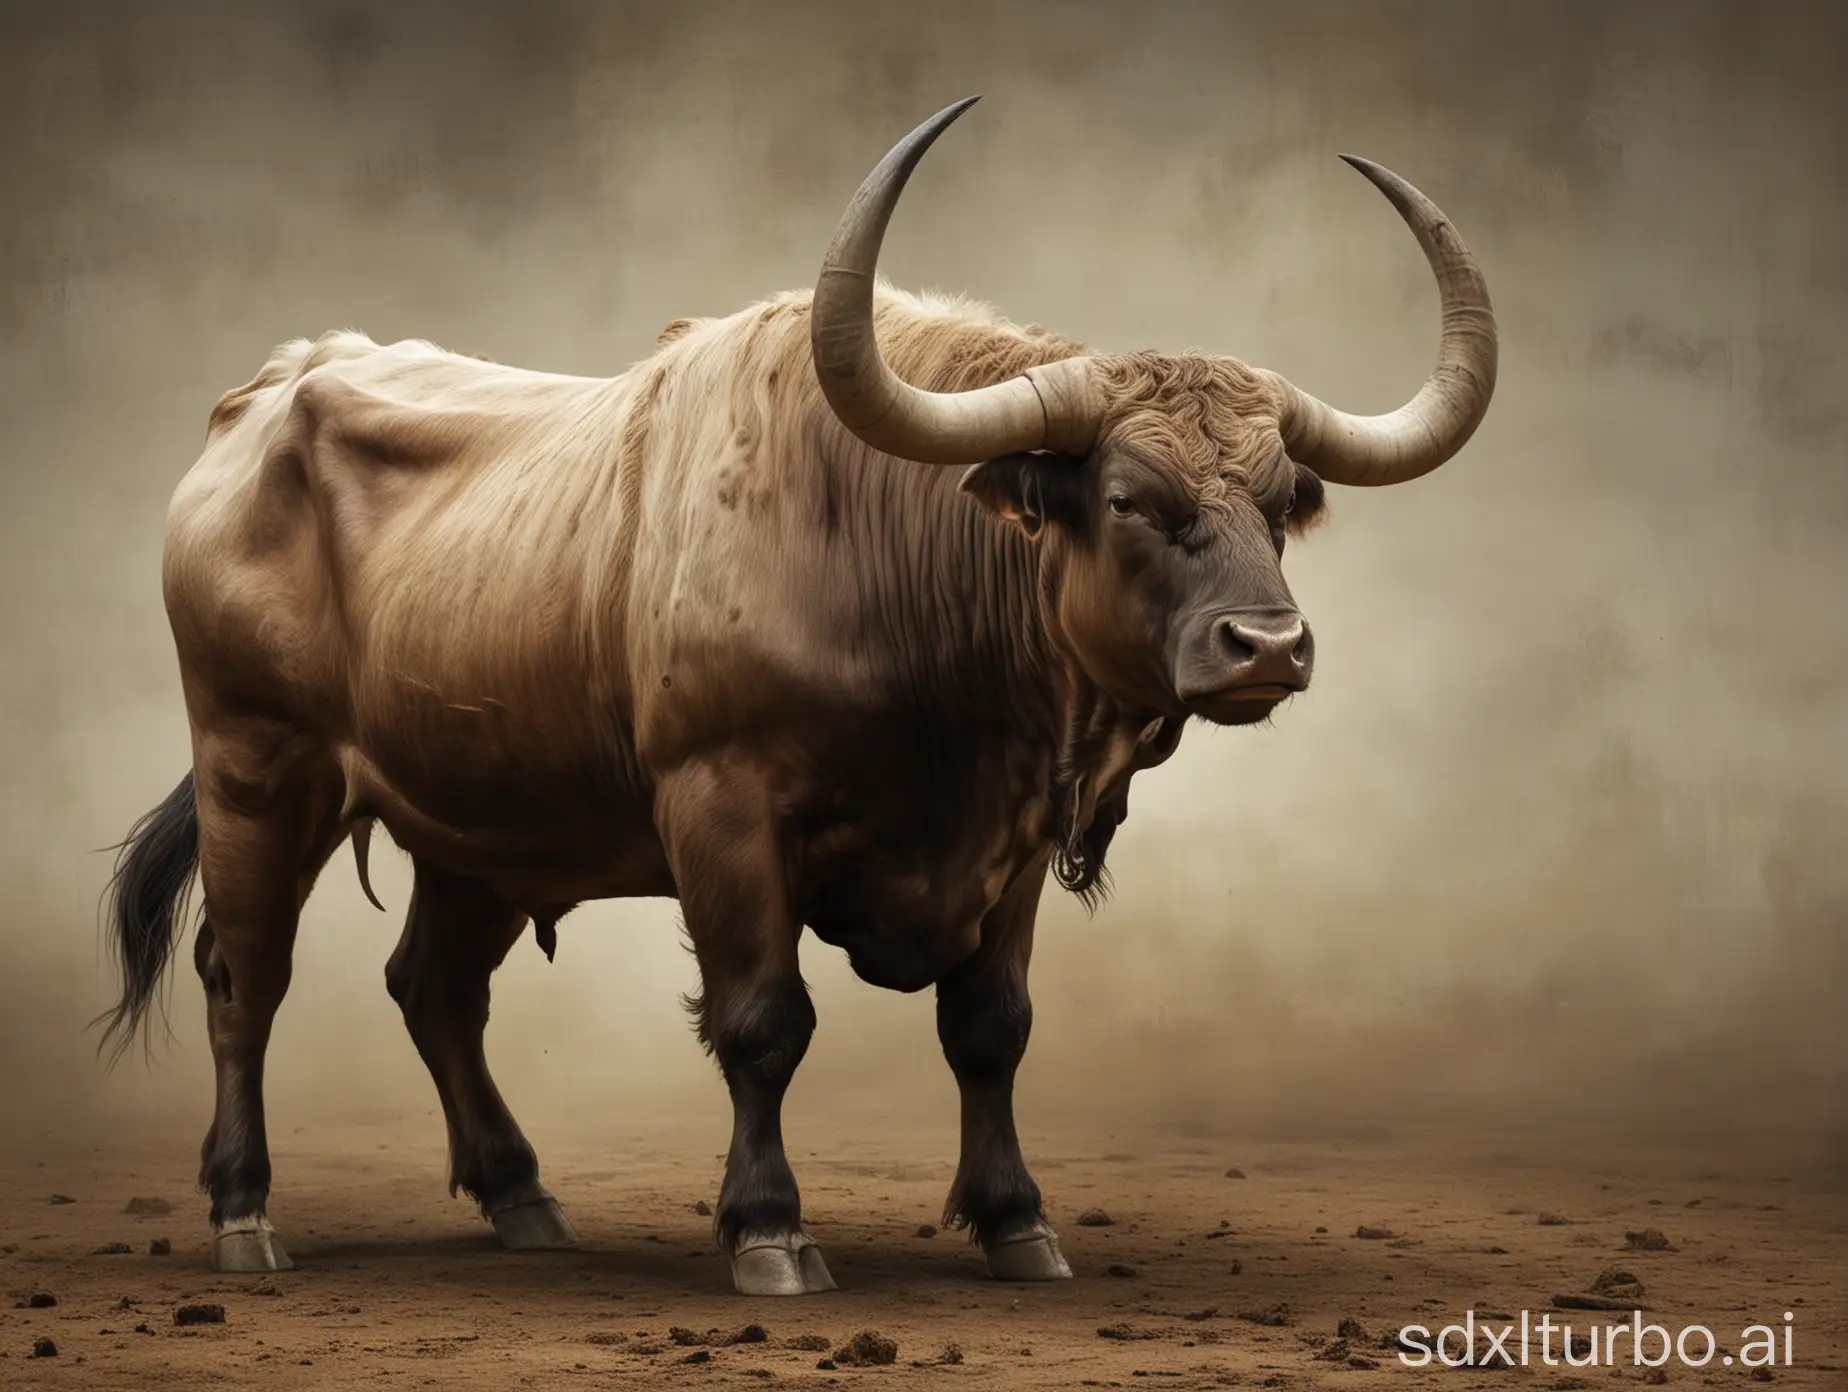 Majestic-Bull-with-Curved-Bent-and-Twisted-Horns